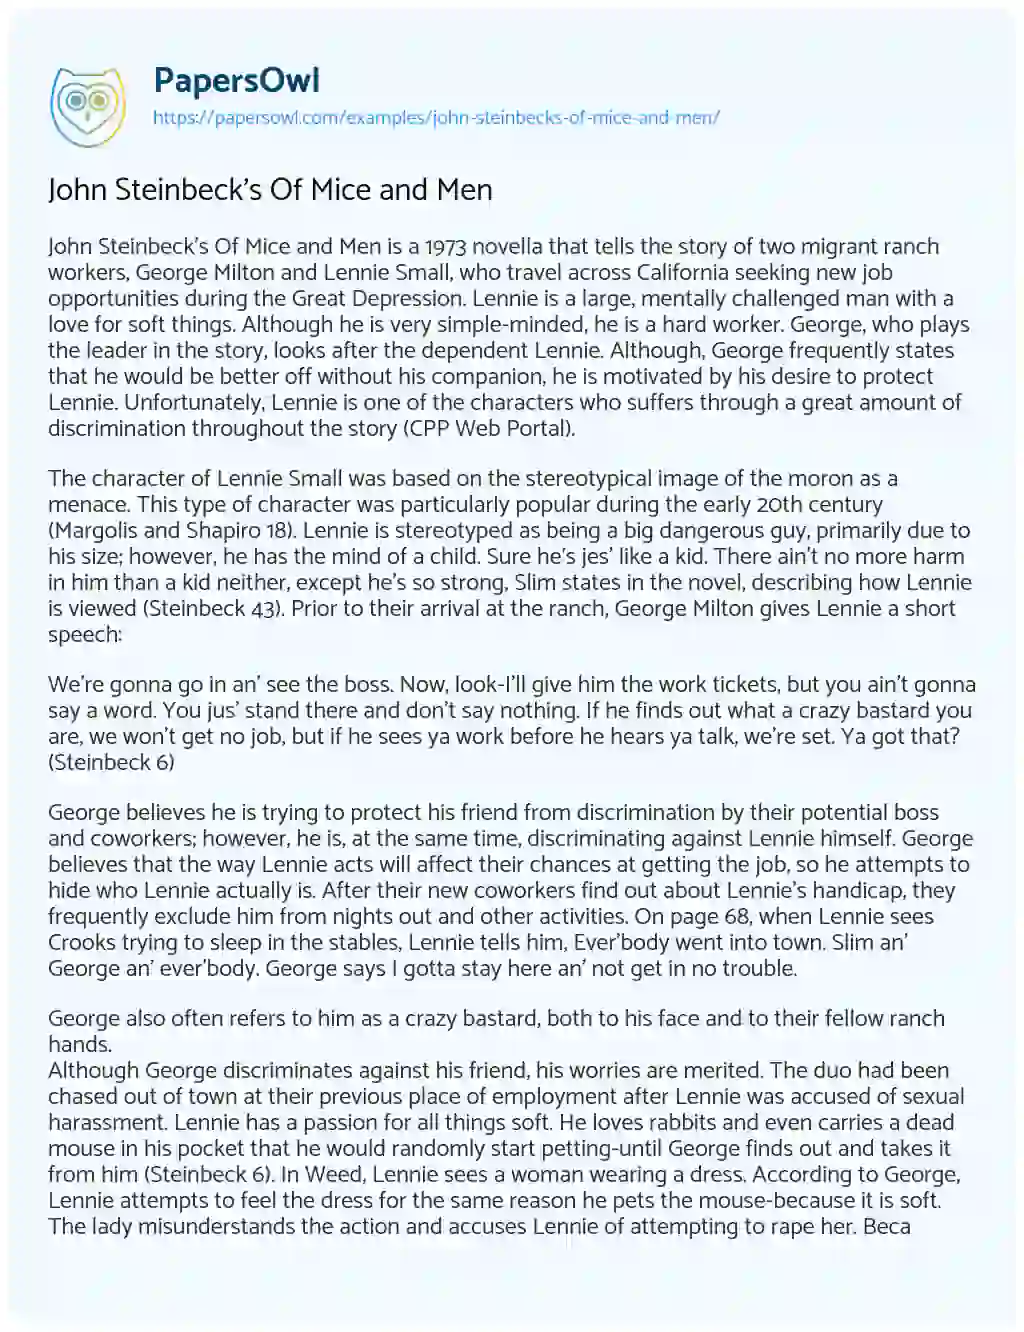 Essay on John Steinbeck’s of Mice and Men